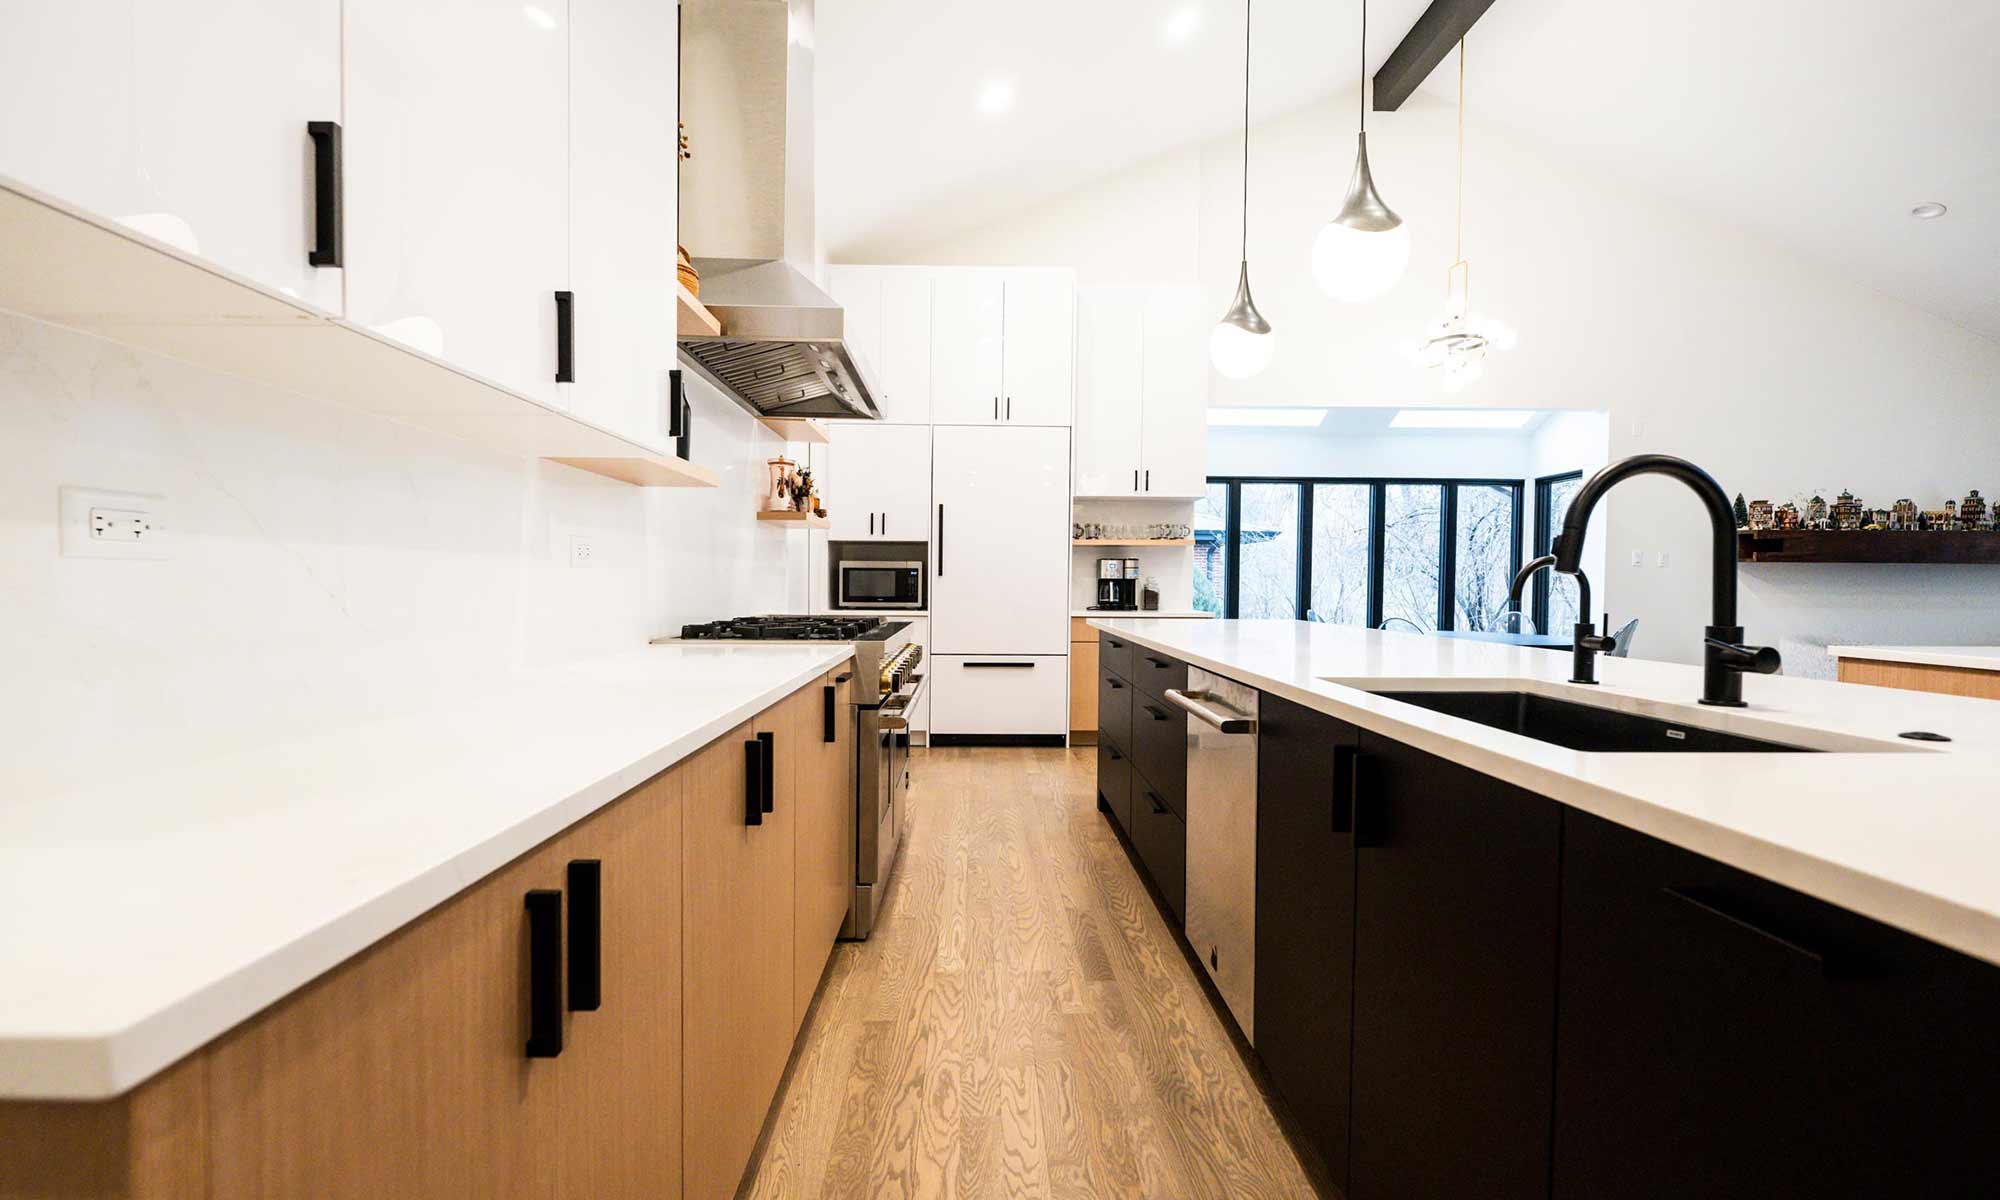 Indian Head Park luxury kithcen remodel by LivCo featuring wood, black, and gloss white modern cabinetry